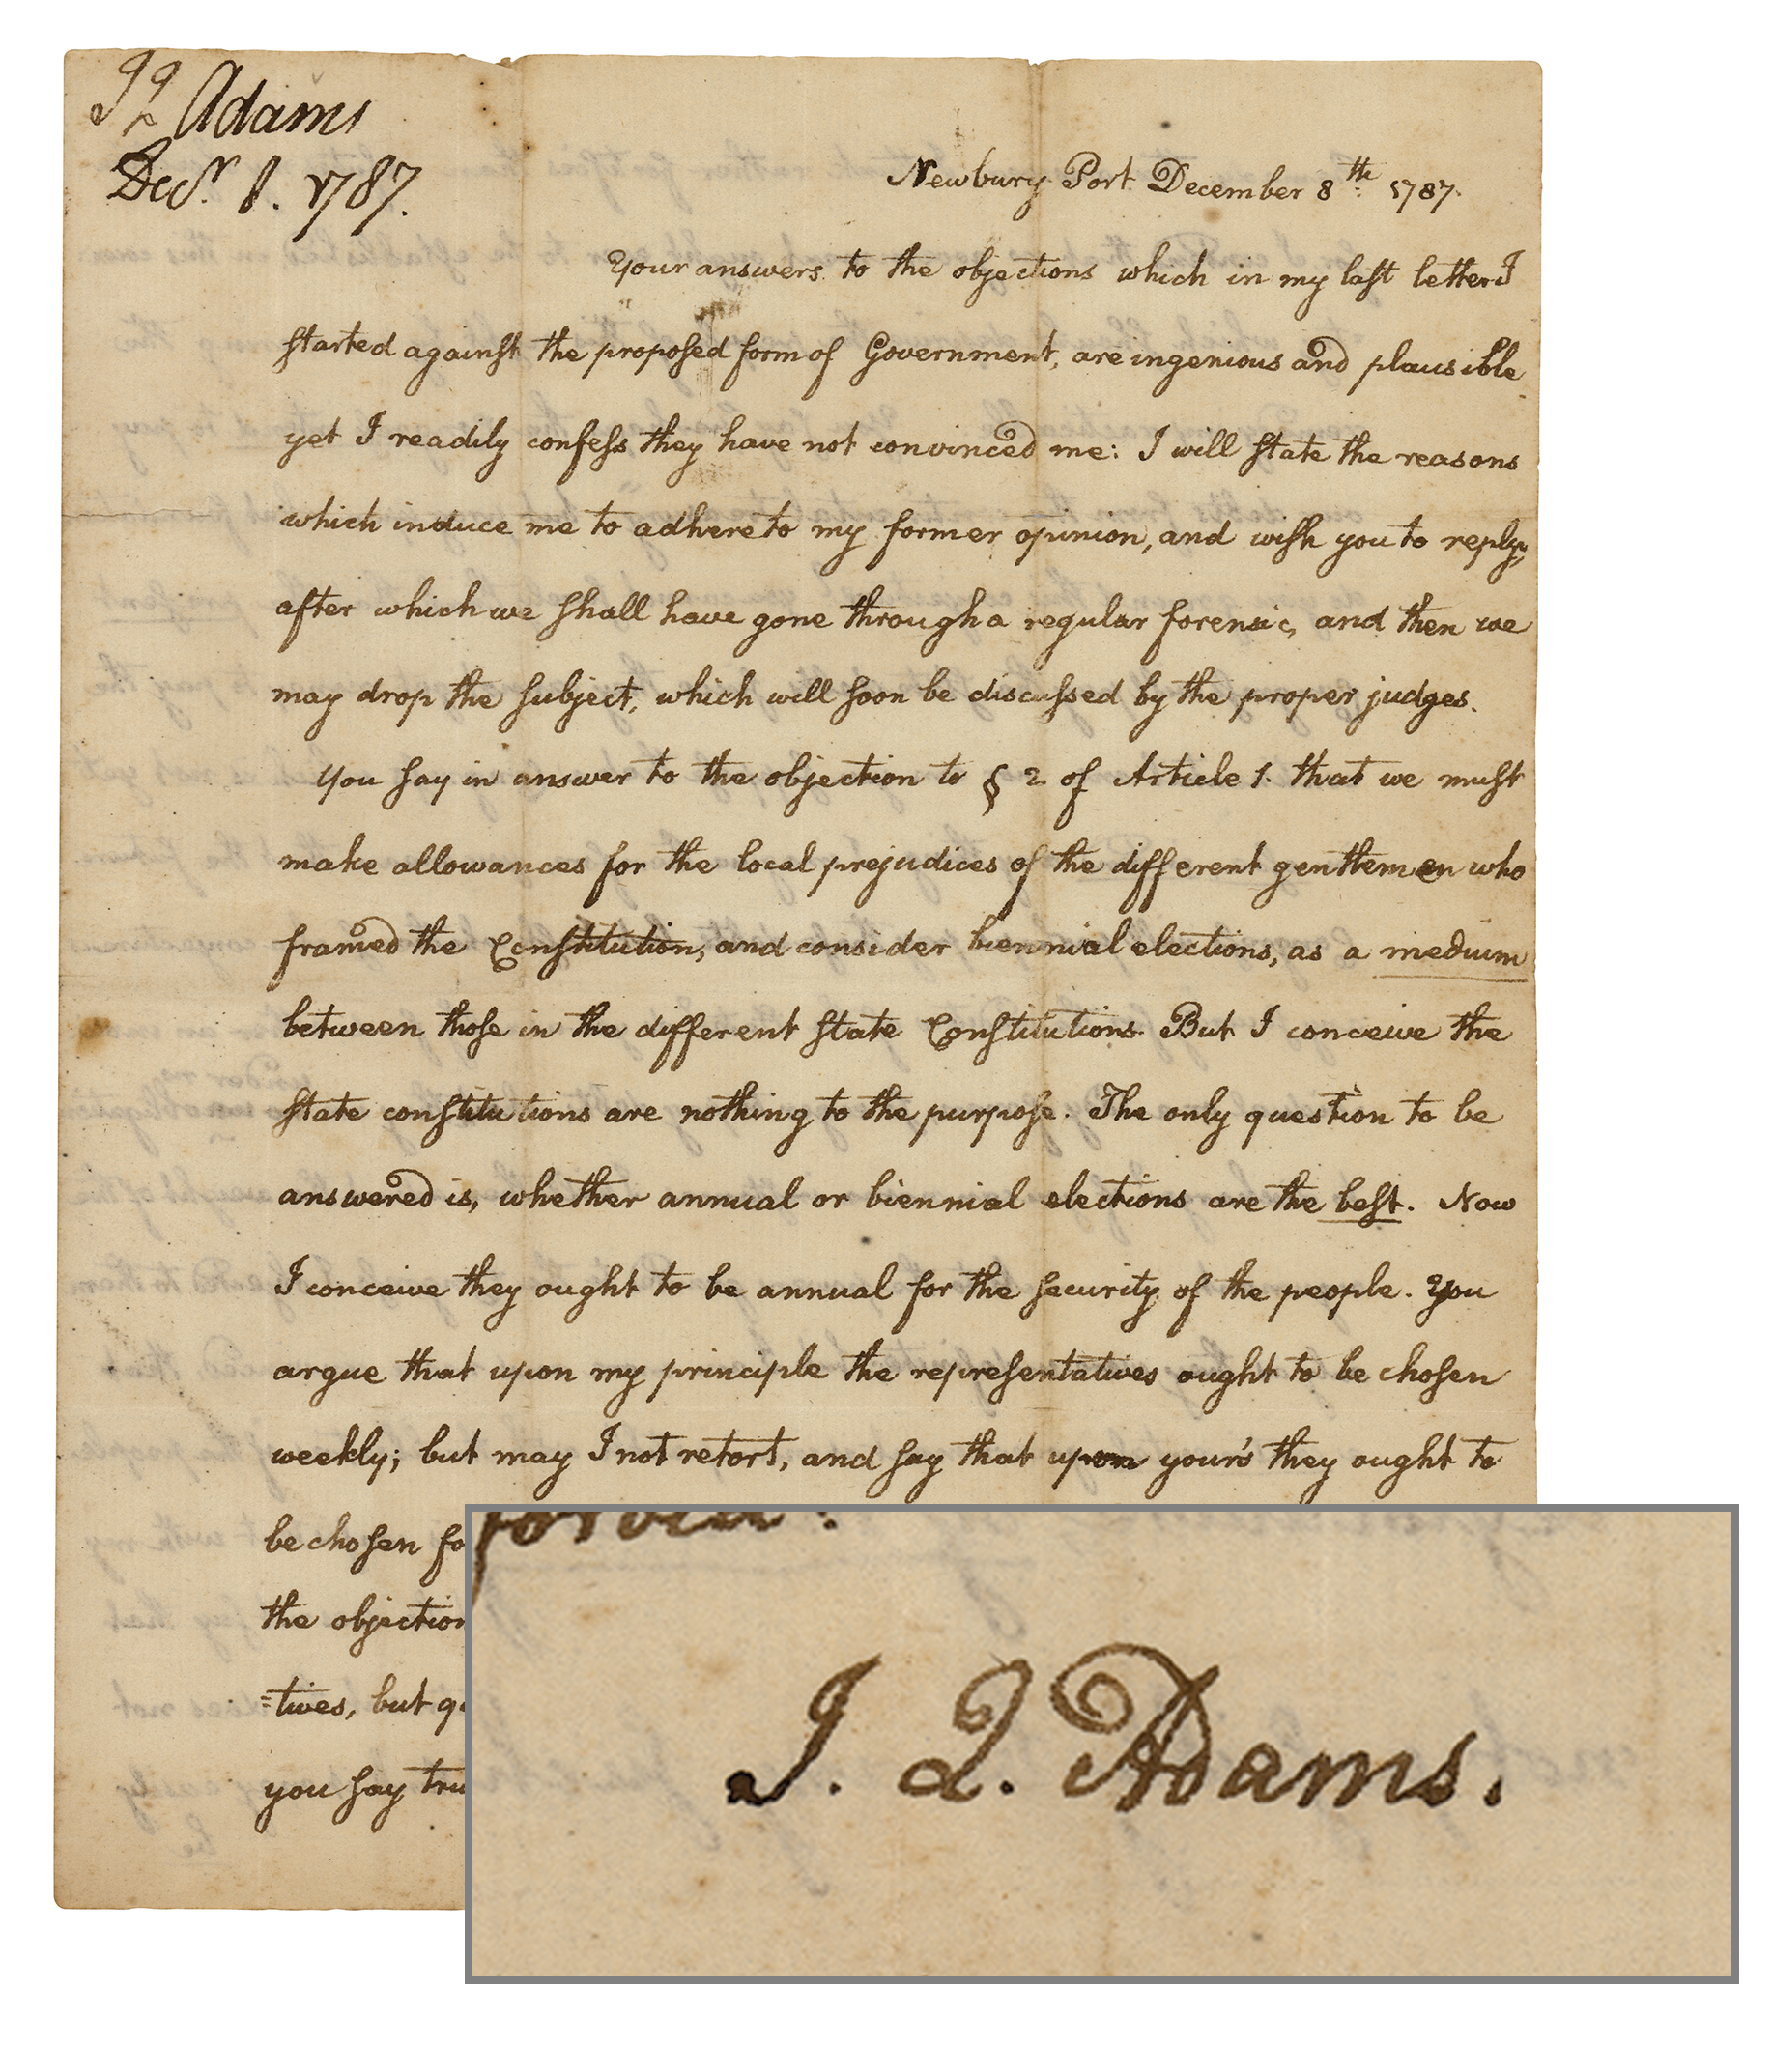 Lot #6012 John Quincy Adams Autograph Letter Signed as 20-Year-Old on Newly Drafted US Constitution (1787) - Image 1